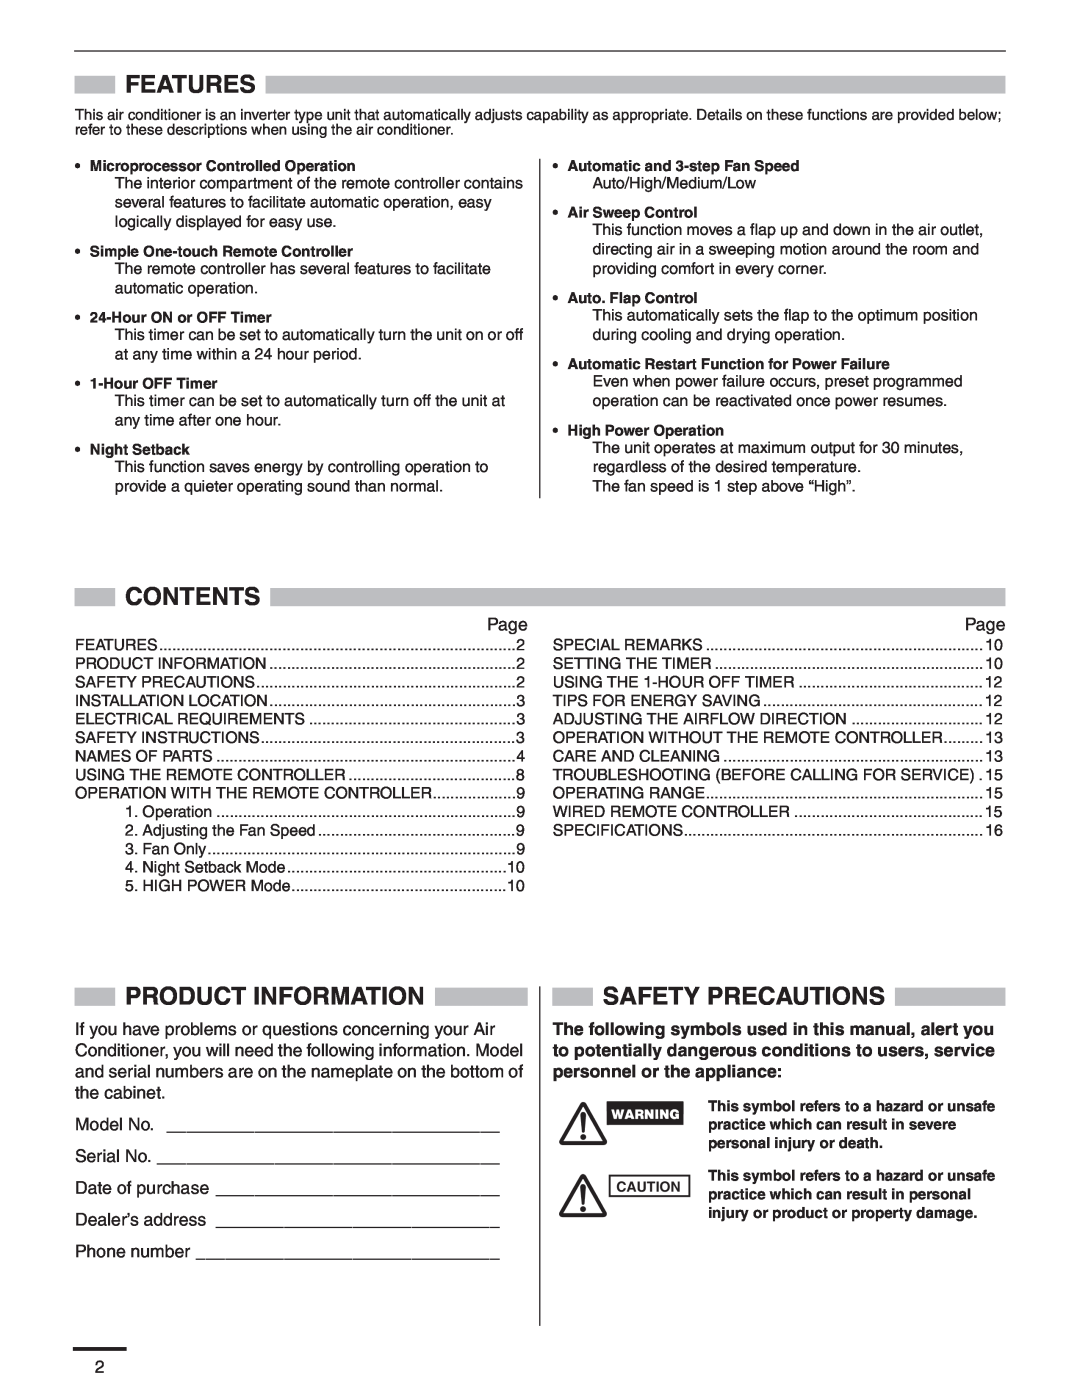 Panasonic R410A service manual Features, Contents, Product Information, Safety Precautions, Auto/High/Medium/Low 